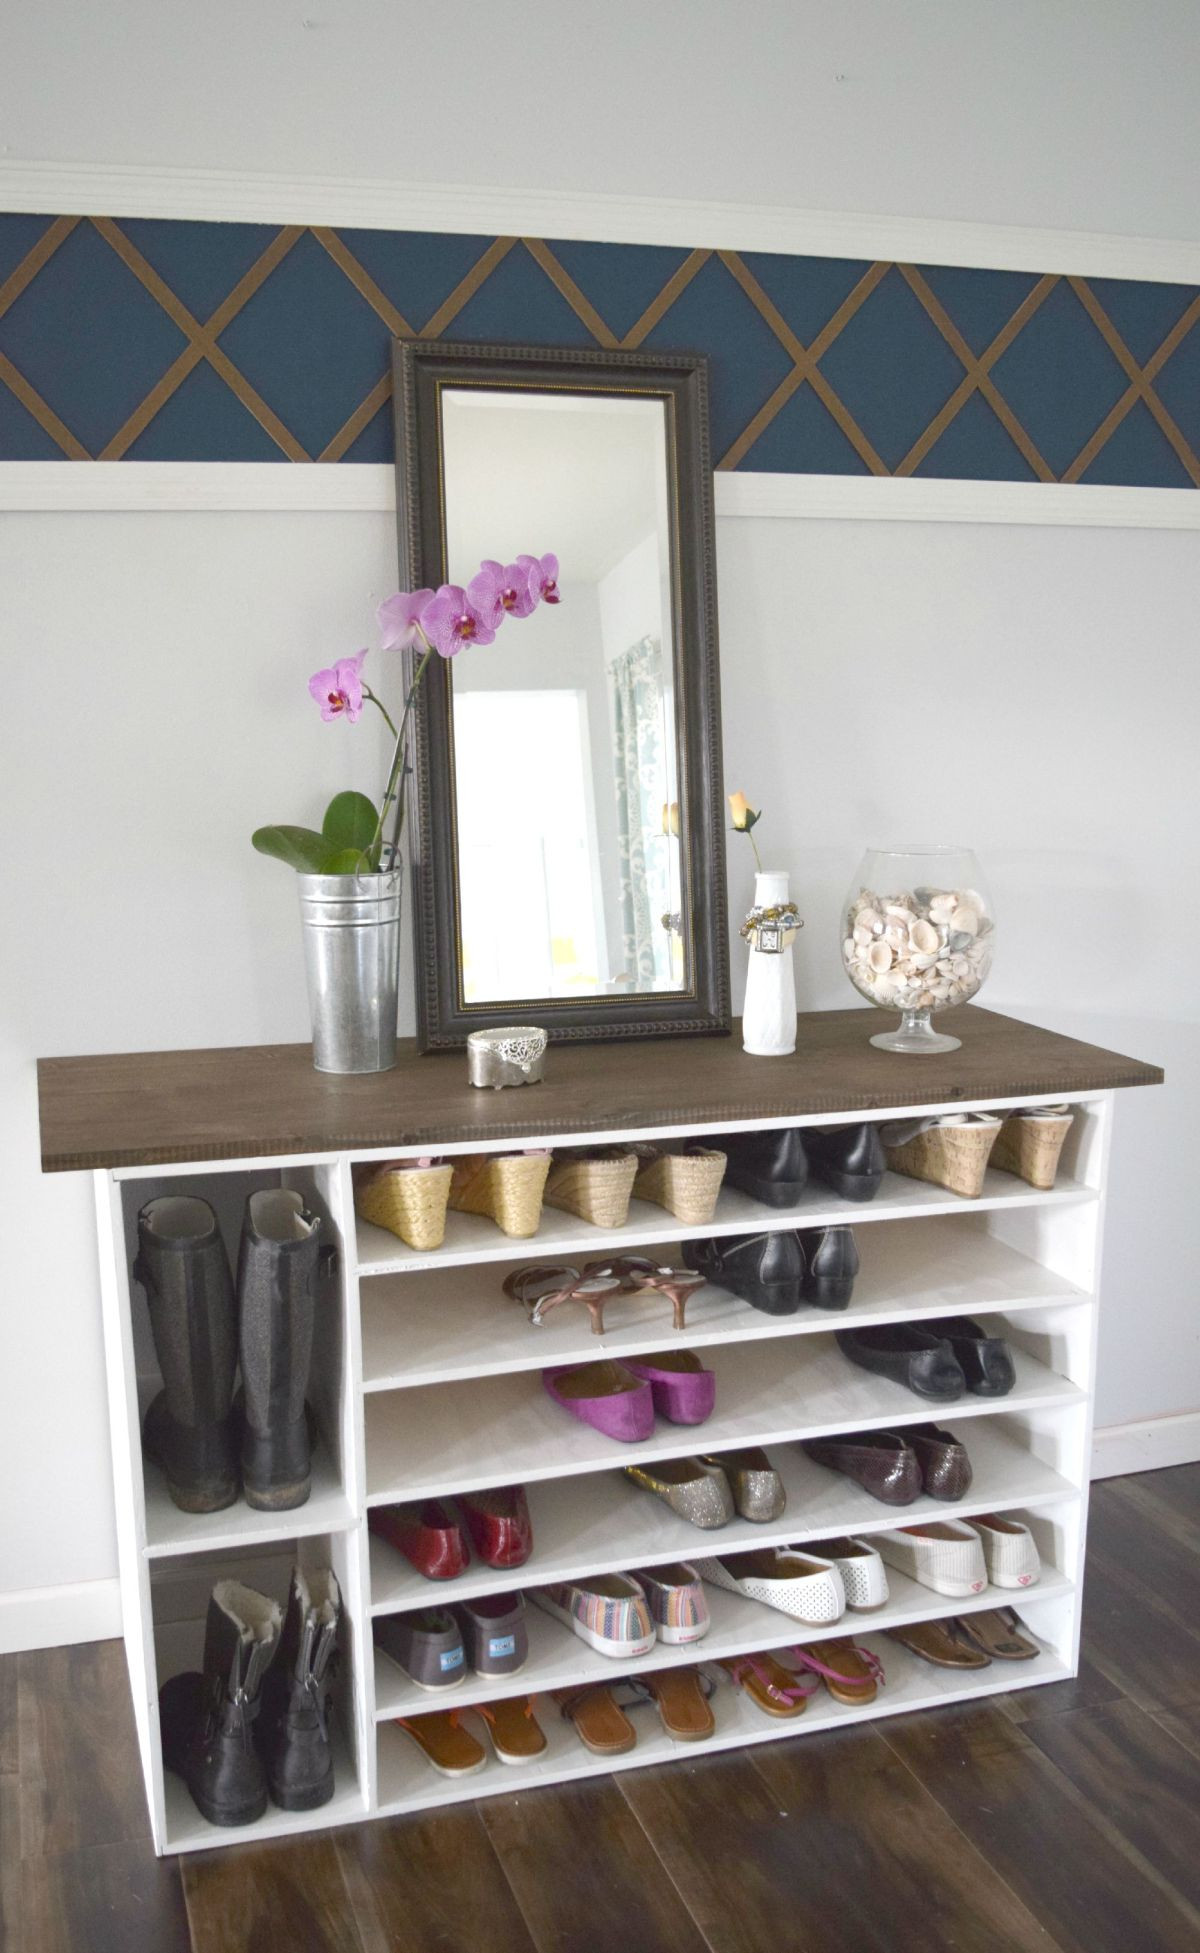 DIY Shoe Rack For Small Closet
 Stylish DIY Shoe Rack Perfect for Any Room